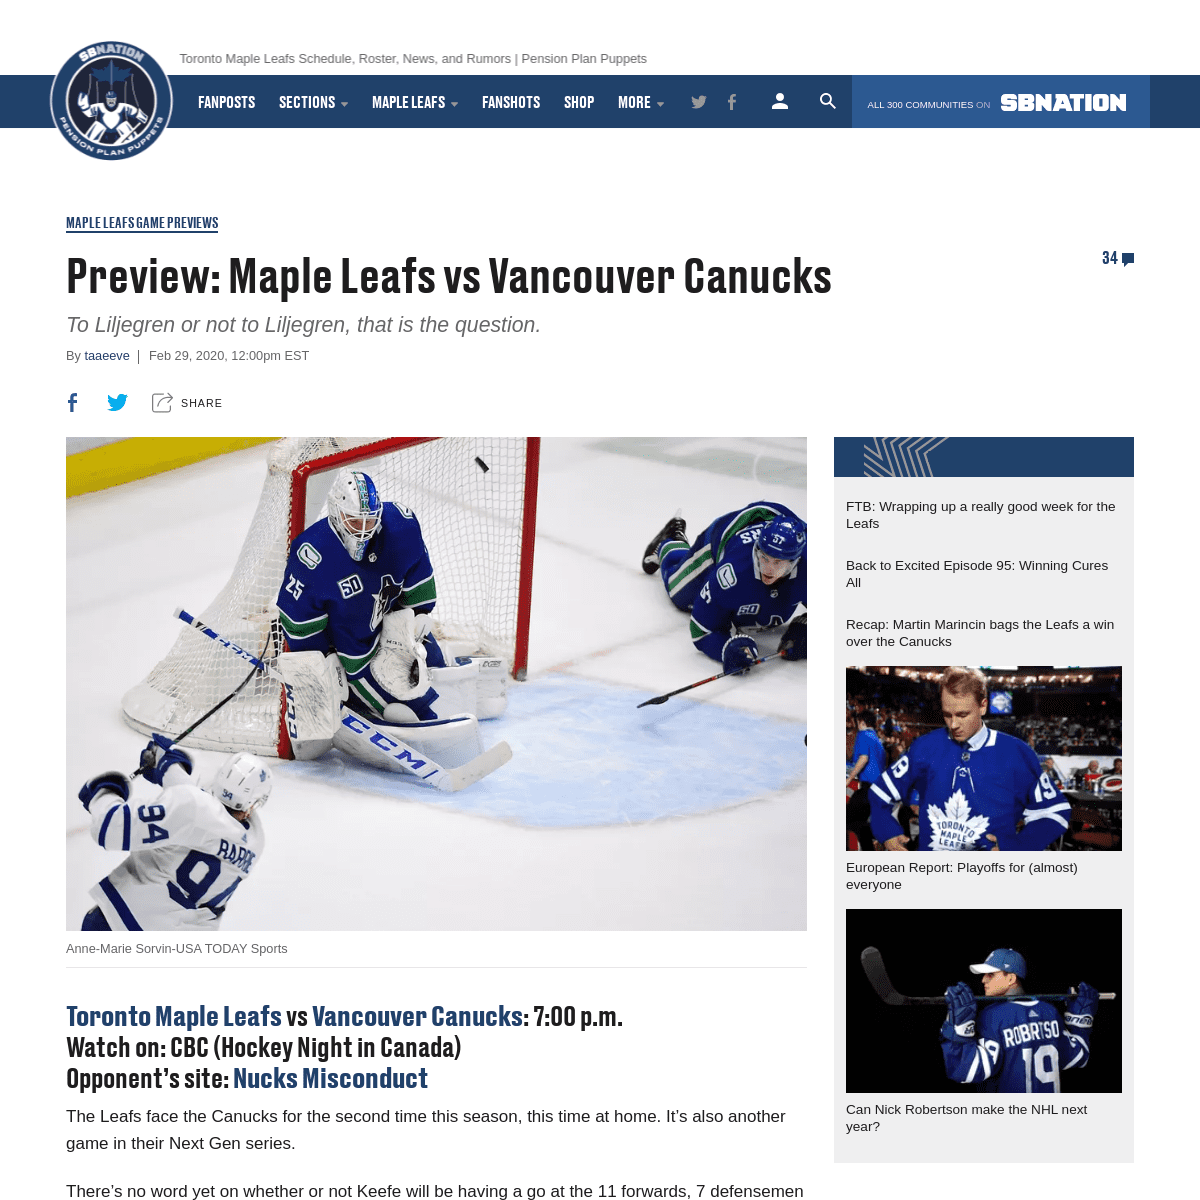 A complete backup of www.pensionplanpuppets.com/2020/2/29/21158979/preview-toronto-maple-leafs-vs-vancouver-canucks-game-preview